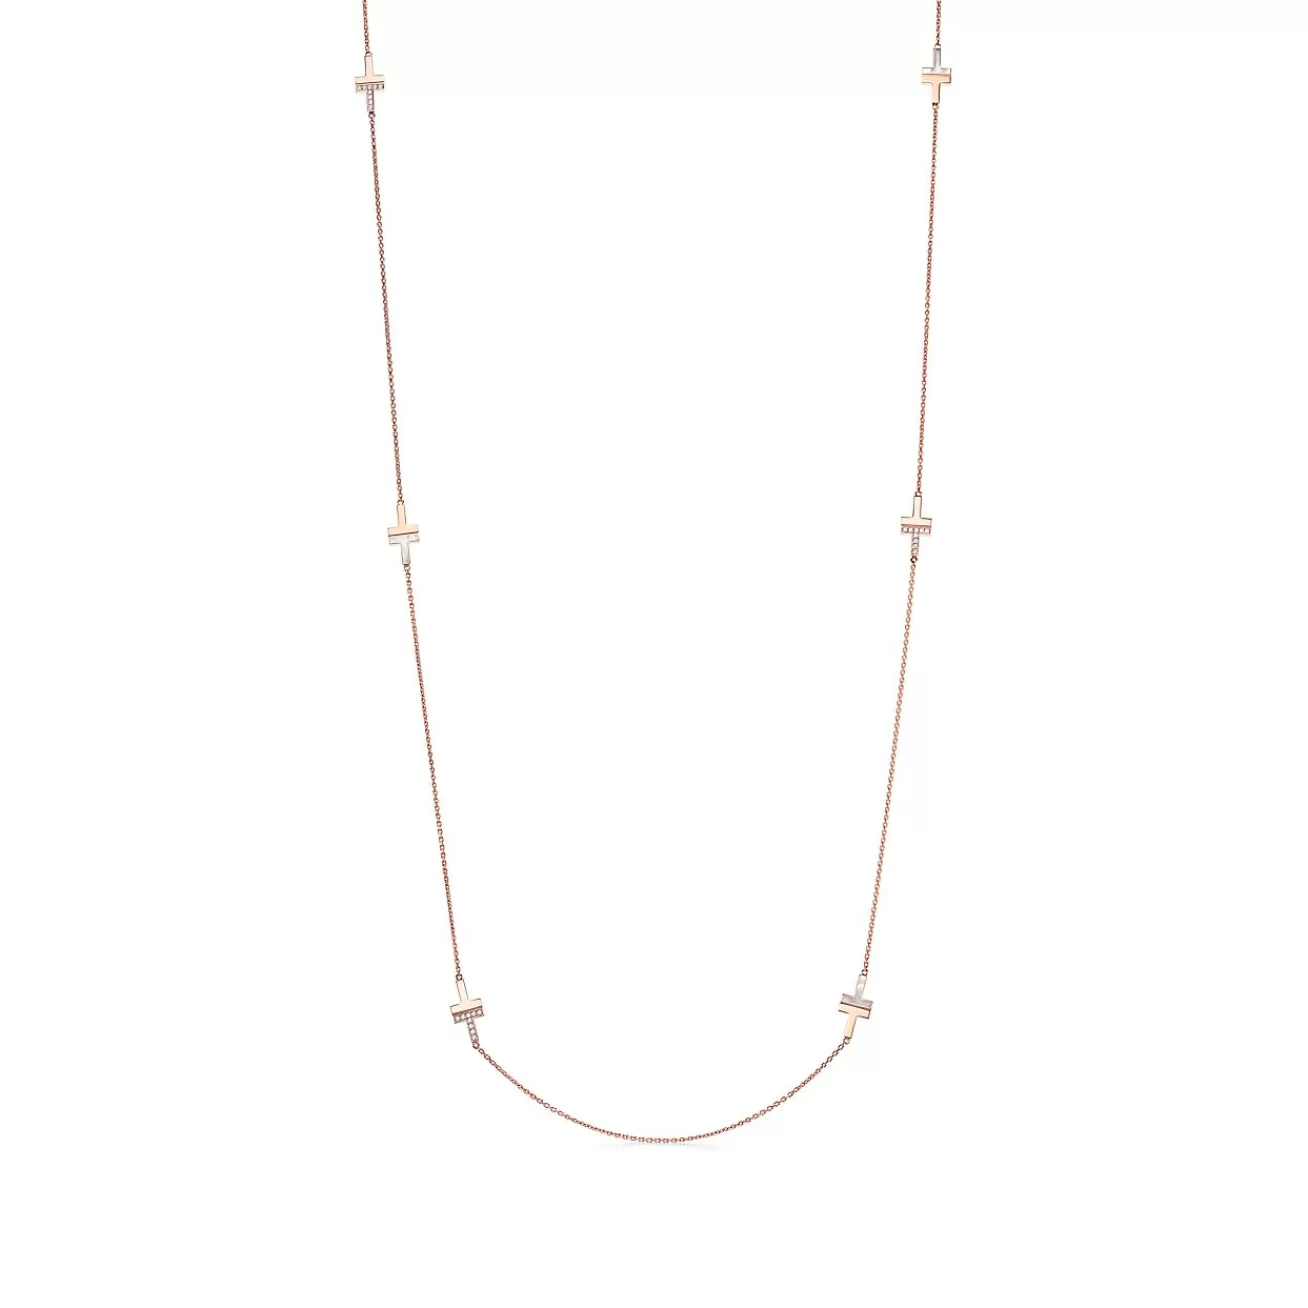 Tiffany & Co. Tiffany T diamond and mother-of-pearl station necklace in 18k rose gold. | ^ Necklaces & Pendants | Gifts for Her